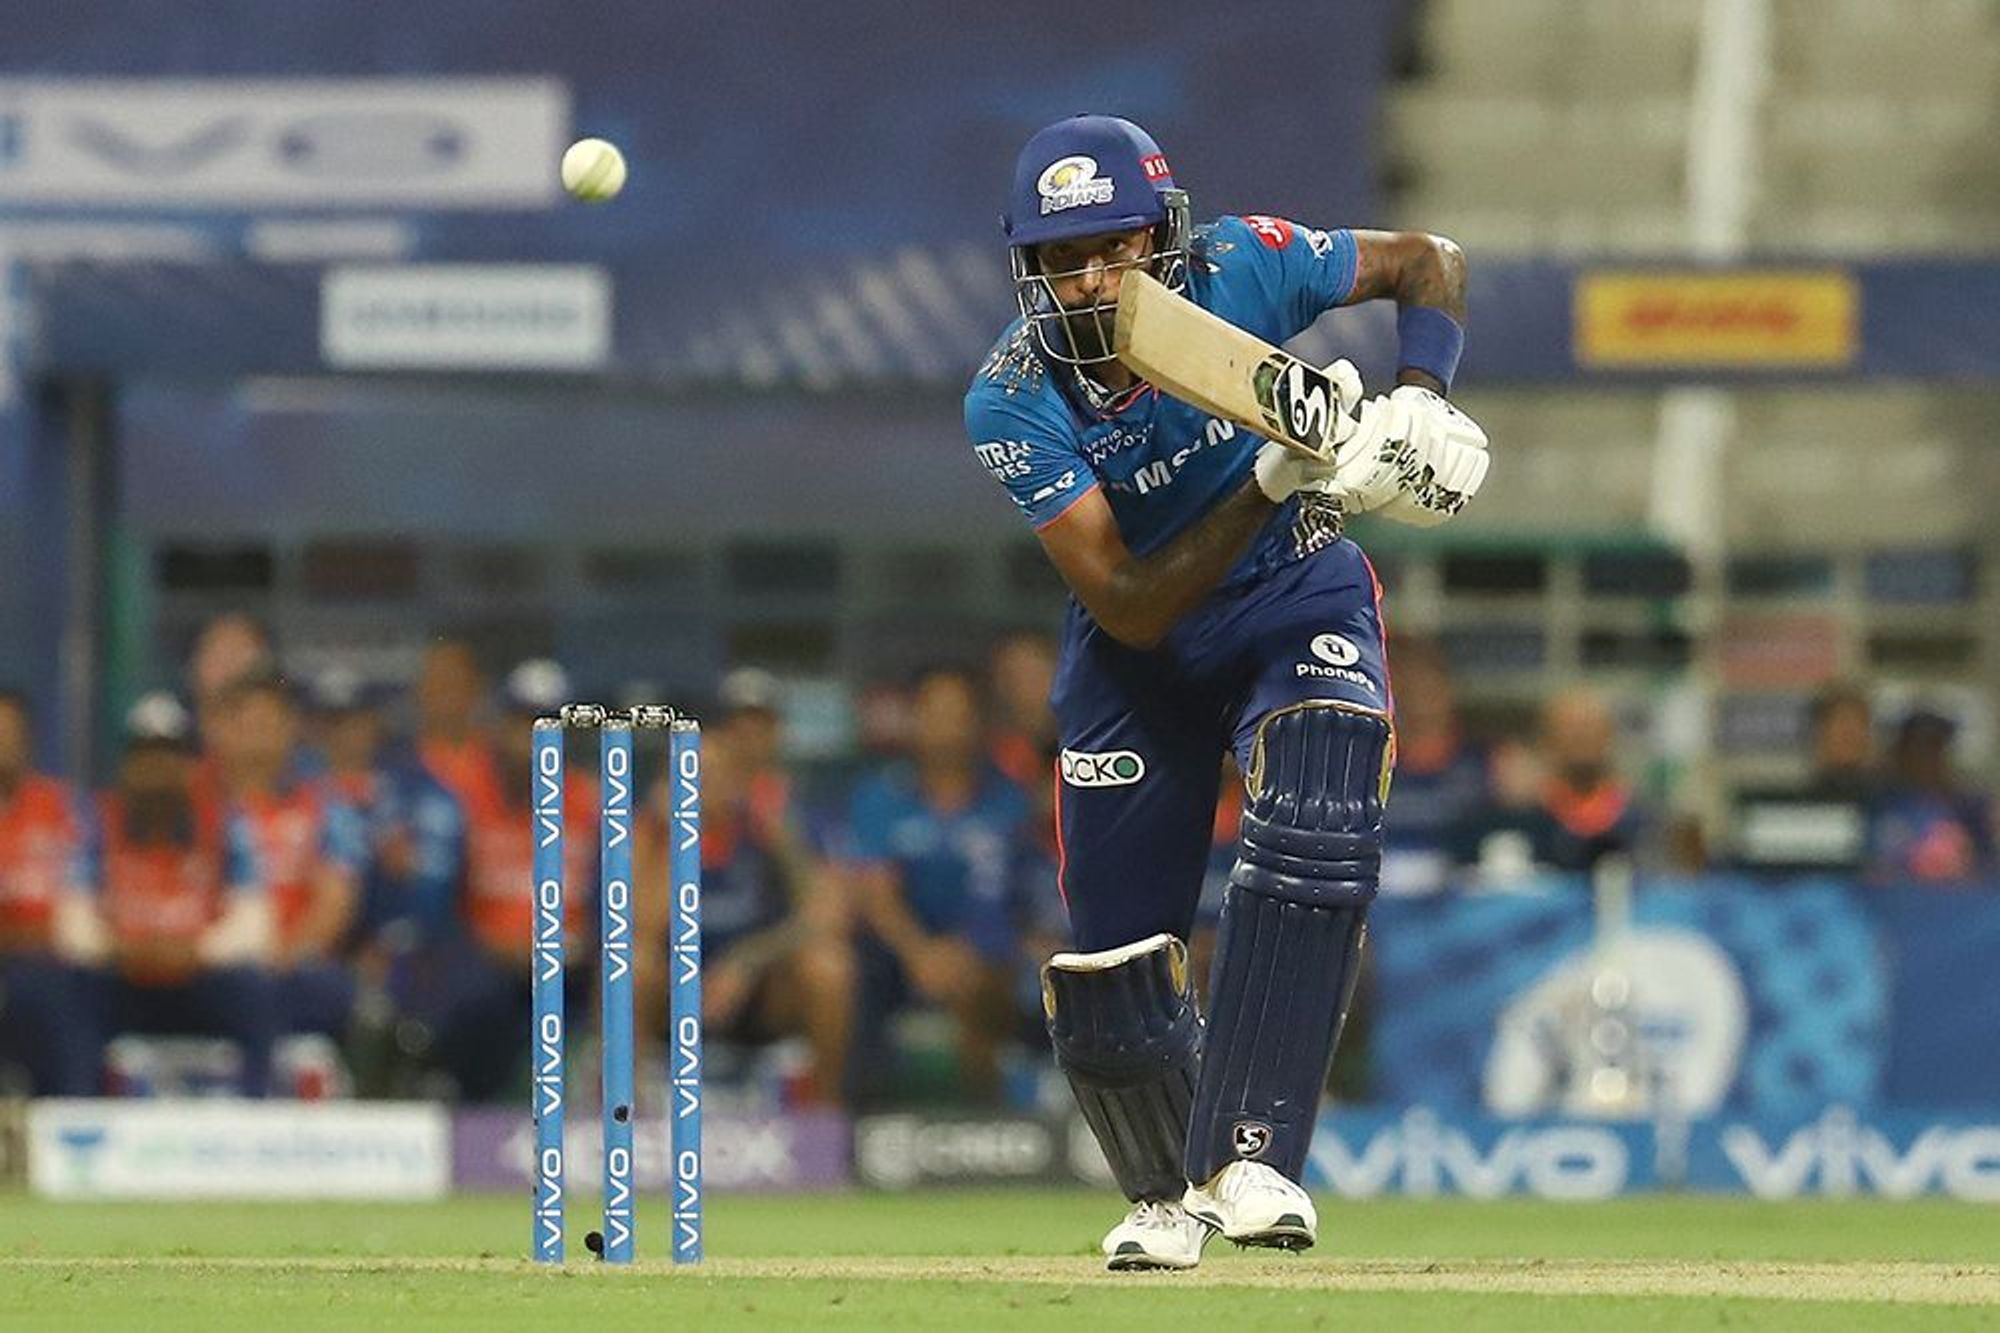 Hardik Pandya has been playing for MI purely as a batter | BCCI/IPL